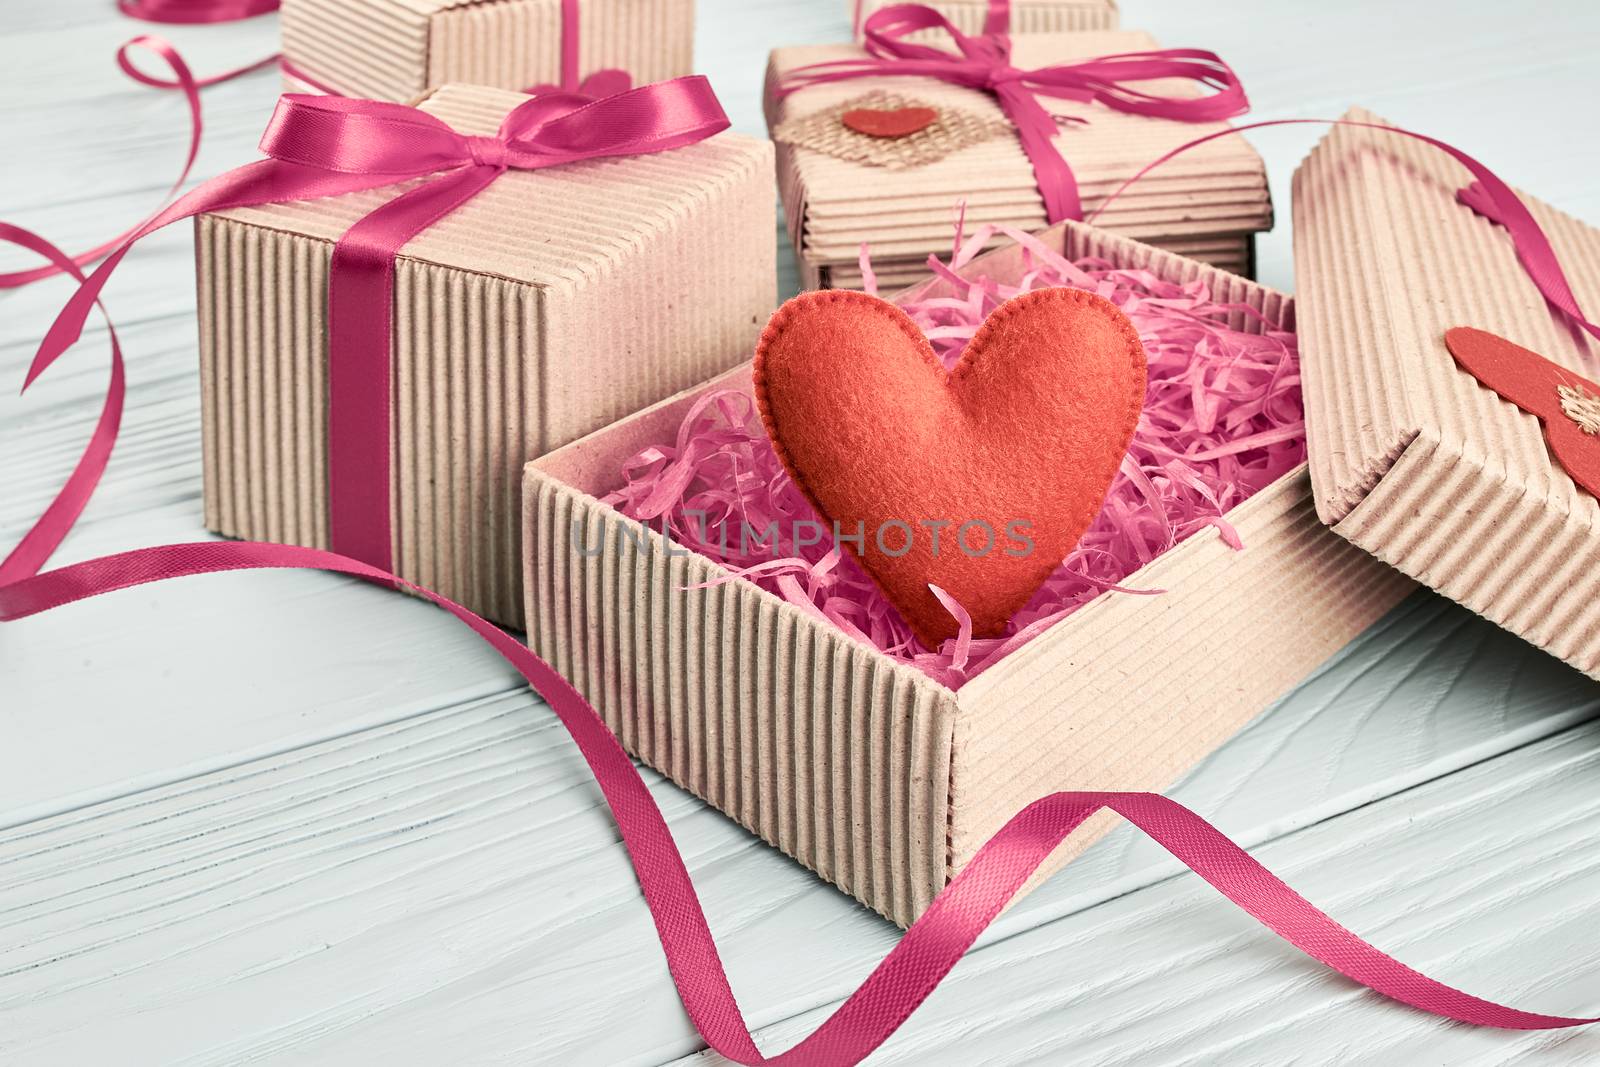 Valentines Day. Love hearts, gift boxes, presents stack. Handmade red heart, ribbons felt. Vintage retro romantic styled. Unusual creative art greeting card, wooden blue background, copyspace